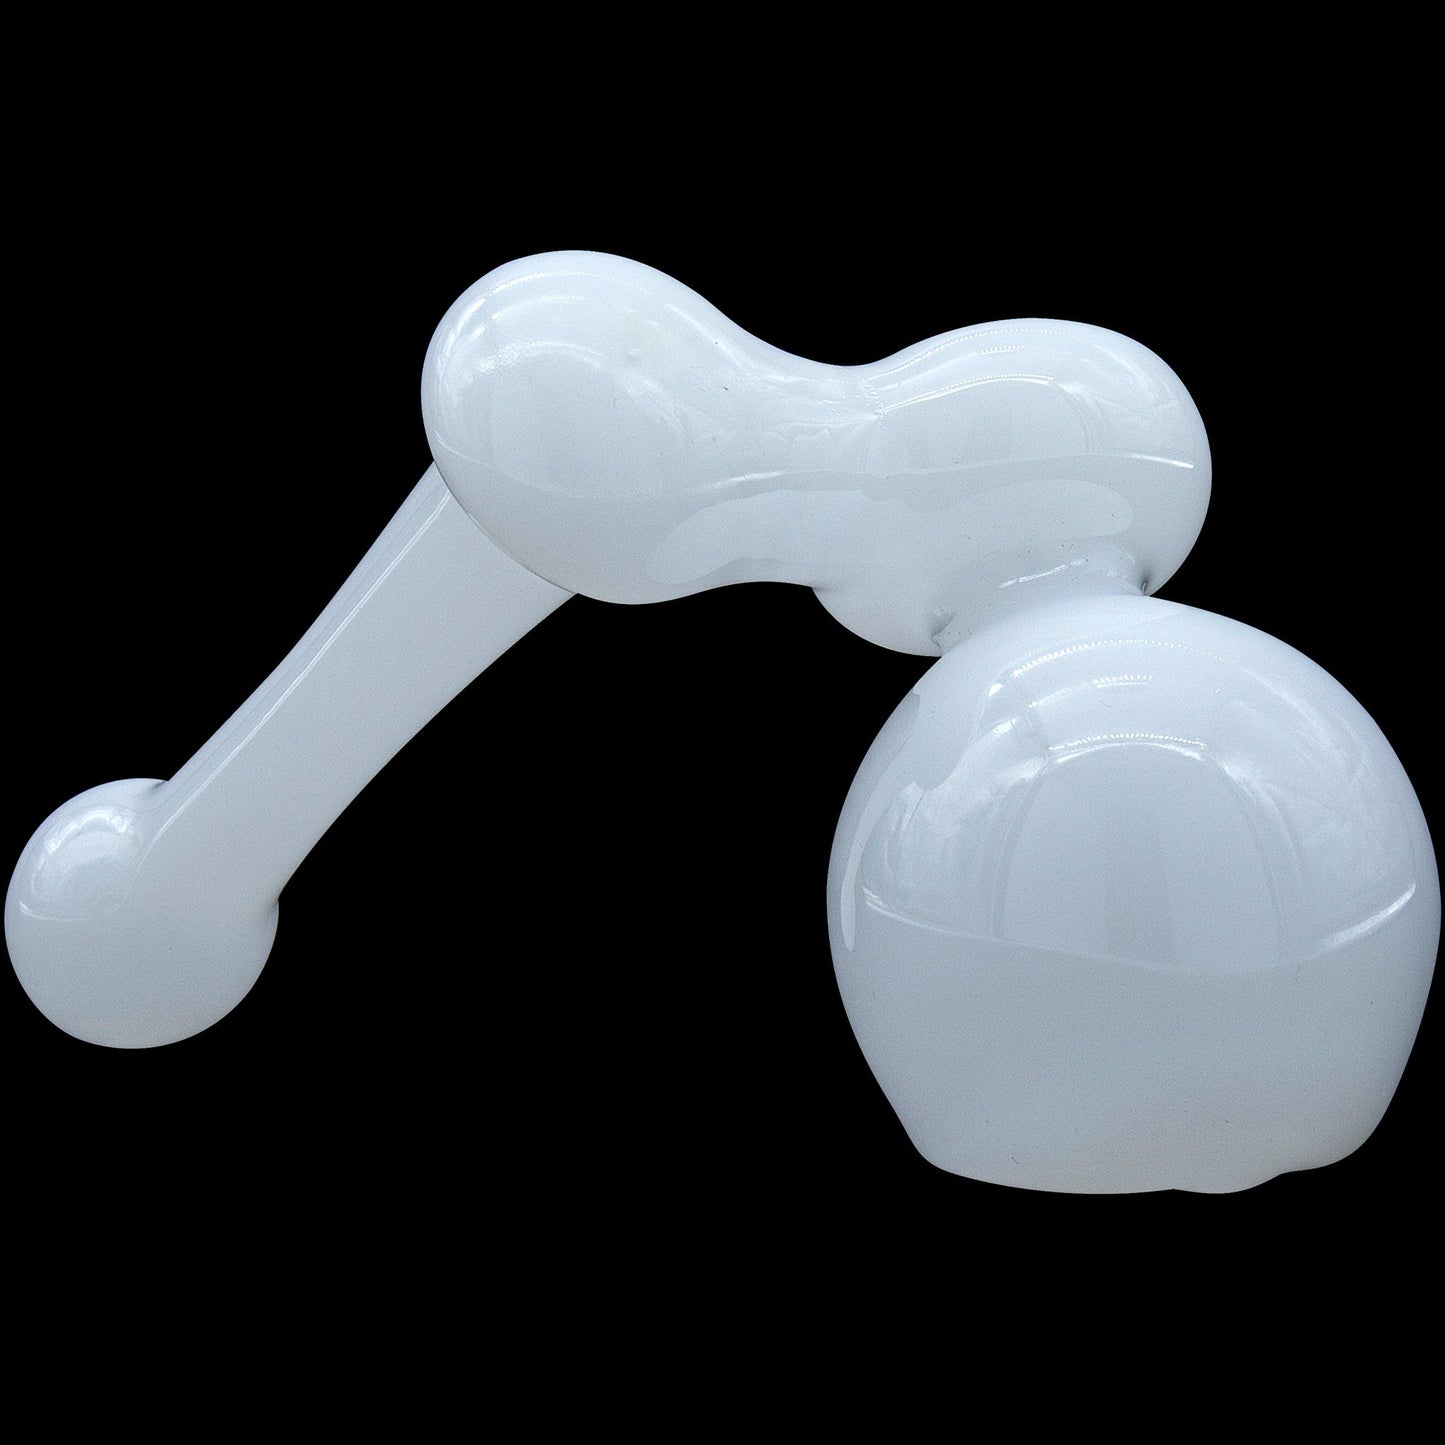 The "Ivory Sidecar" Bubbler